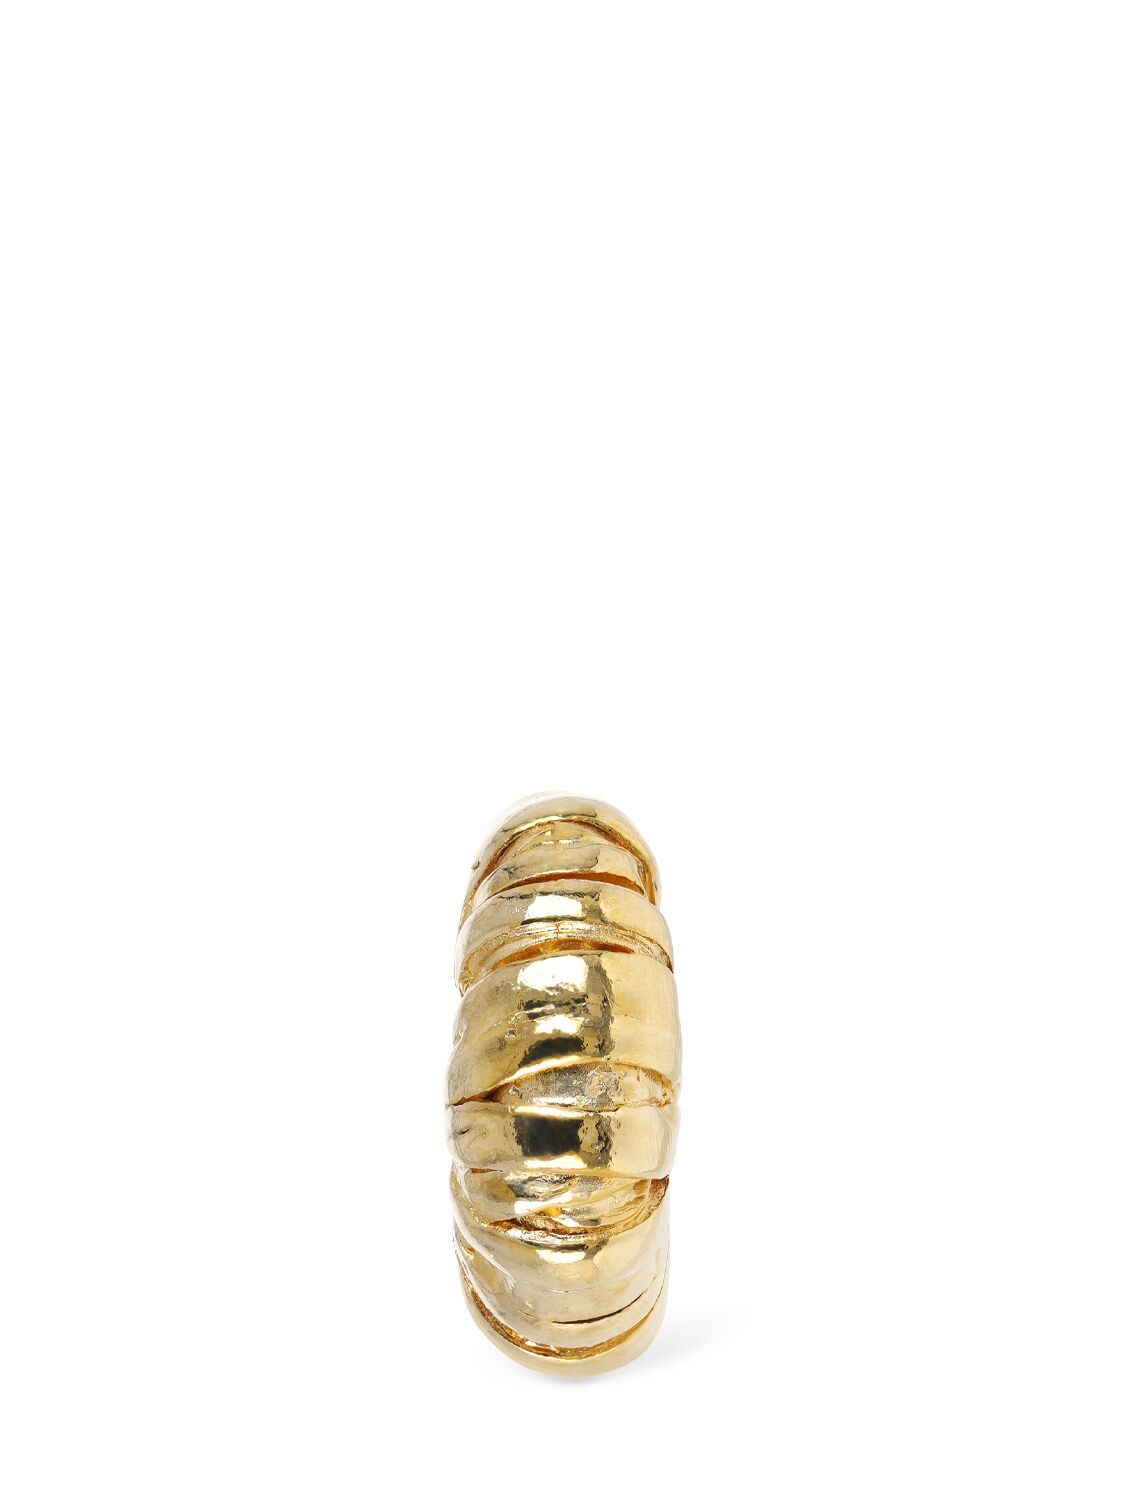 Shop Paola Sighinolfi Wrap Thick Ring In Gold